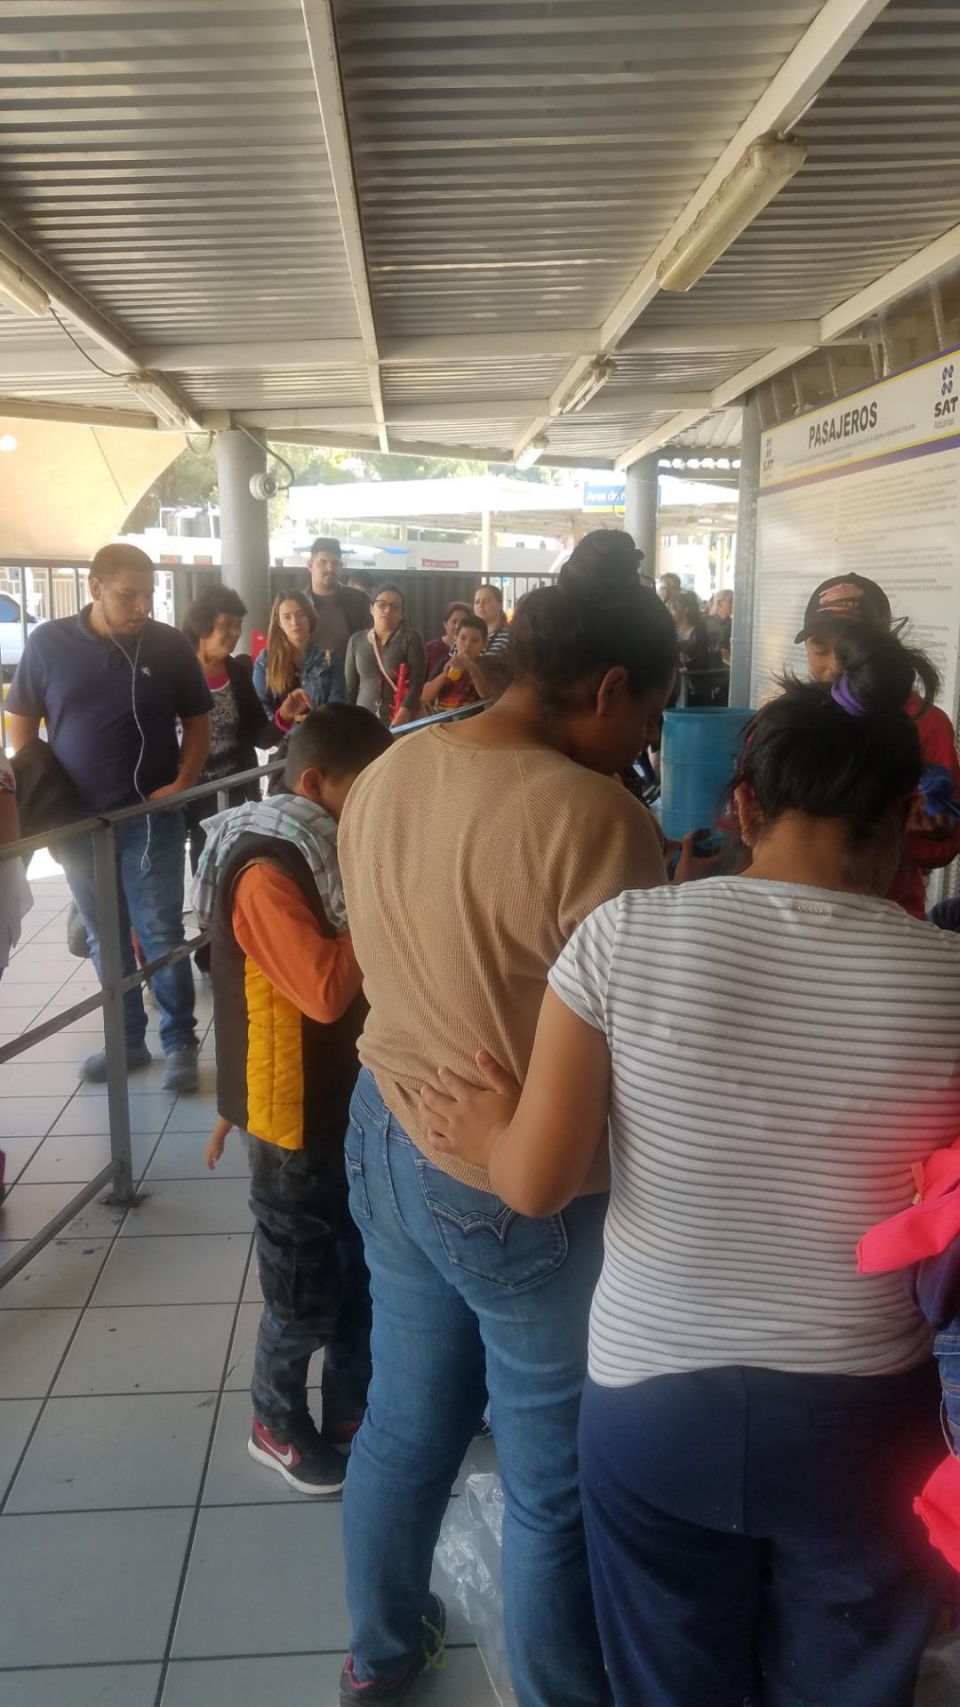 At the Nogales port of entry, commuters and travelers look on as migrant families gather together as they wait  for their turn to present themselves to CBP. Photo: Jody Mashek/AFSC 